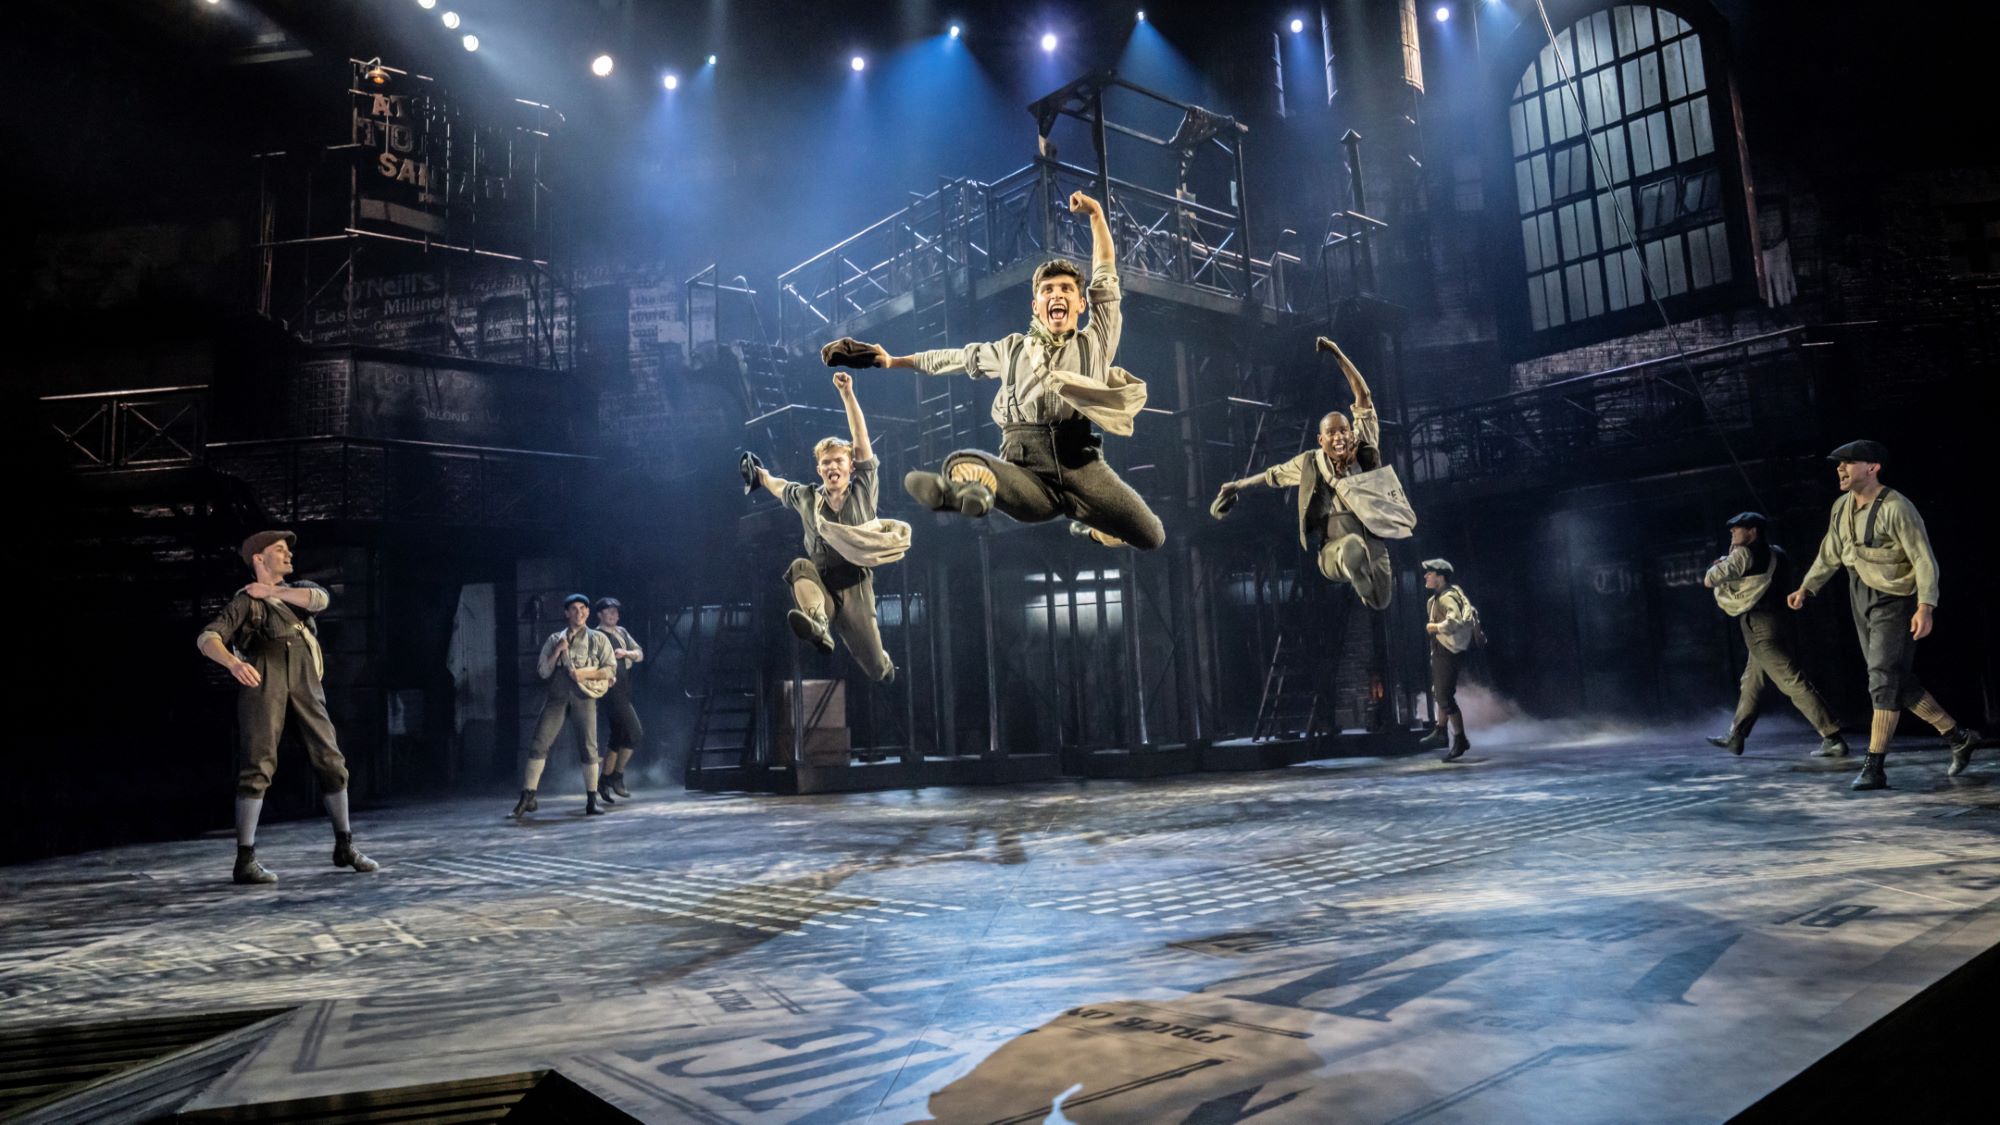 Watch trailer from Disney's Newsies at London's Troubadour Wembley Park